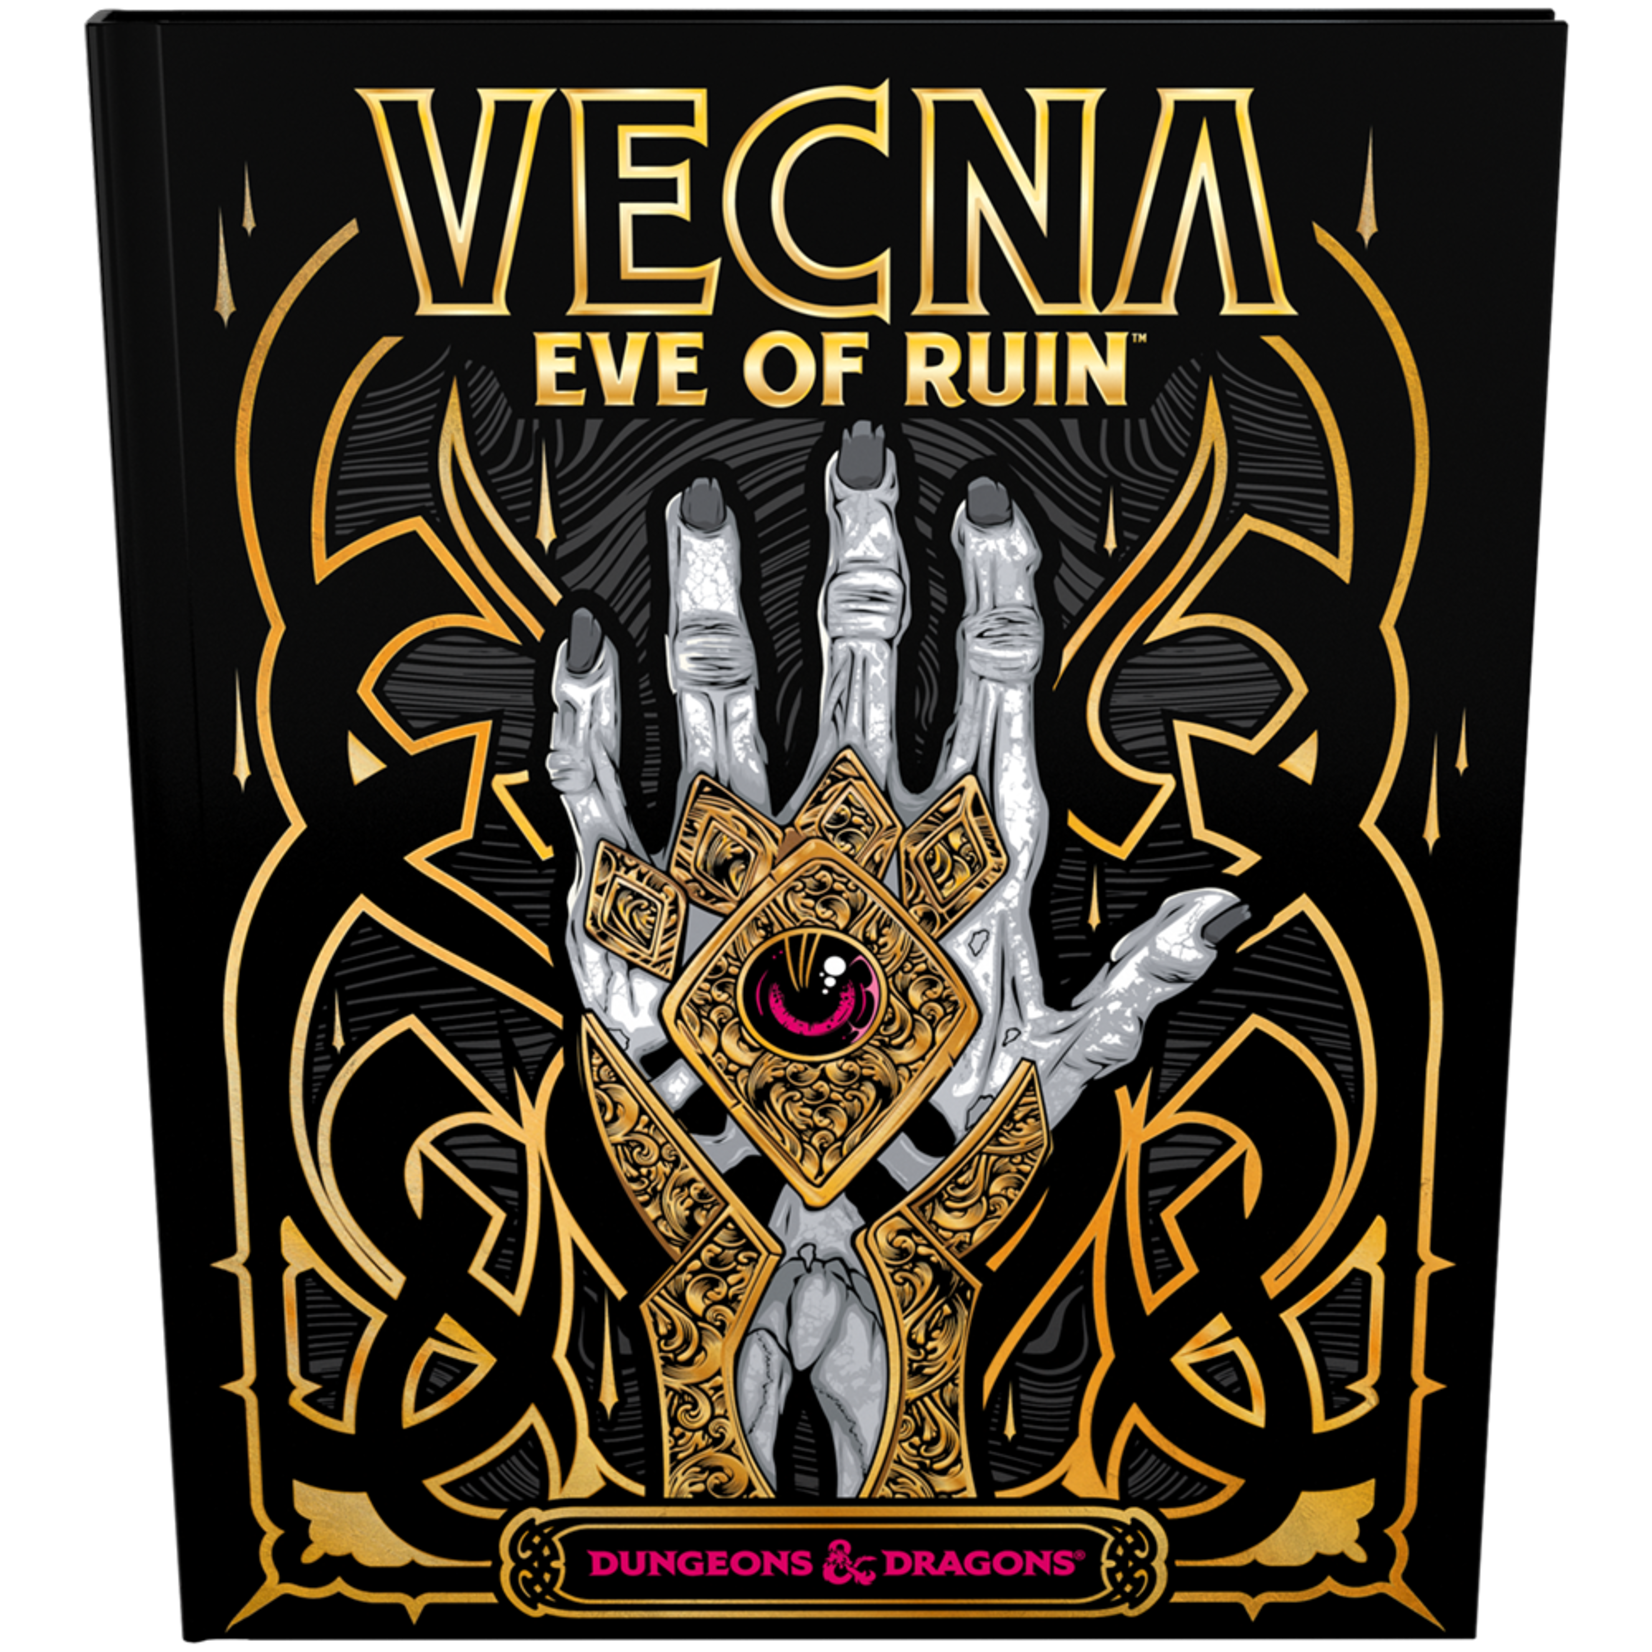 Wizards of the Coast Dungeons & Dragons: Vecna - Eve of Ruin Hardcover [Alternate Art Cover] (Preorder)